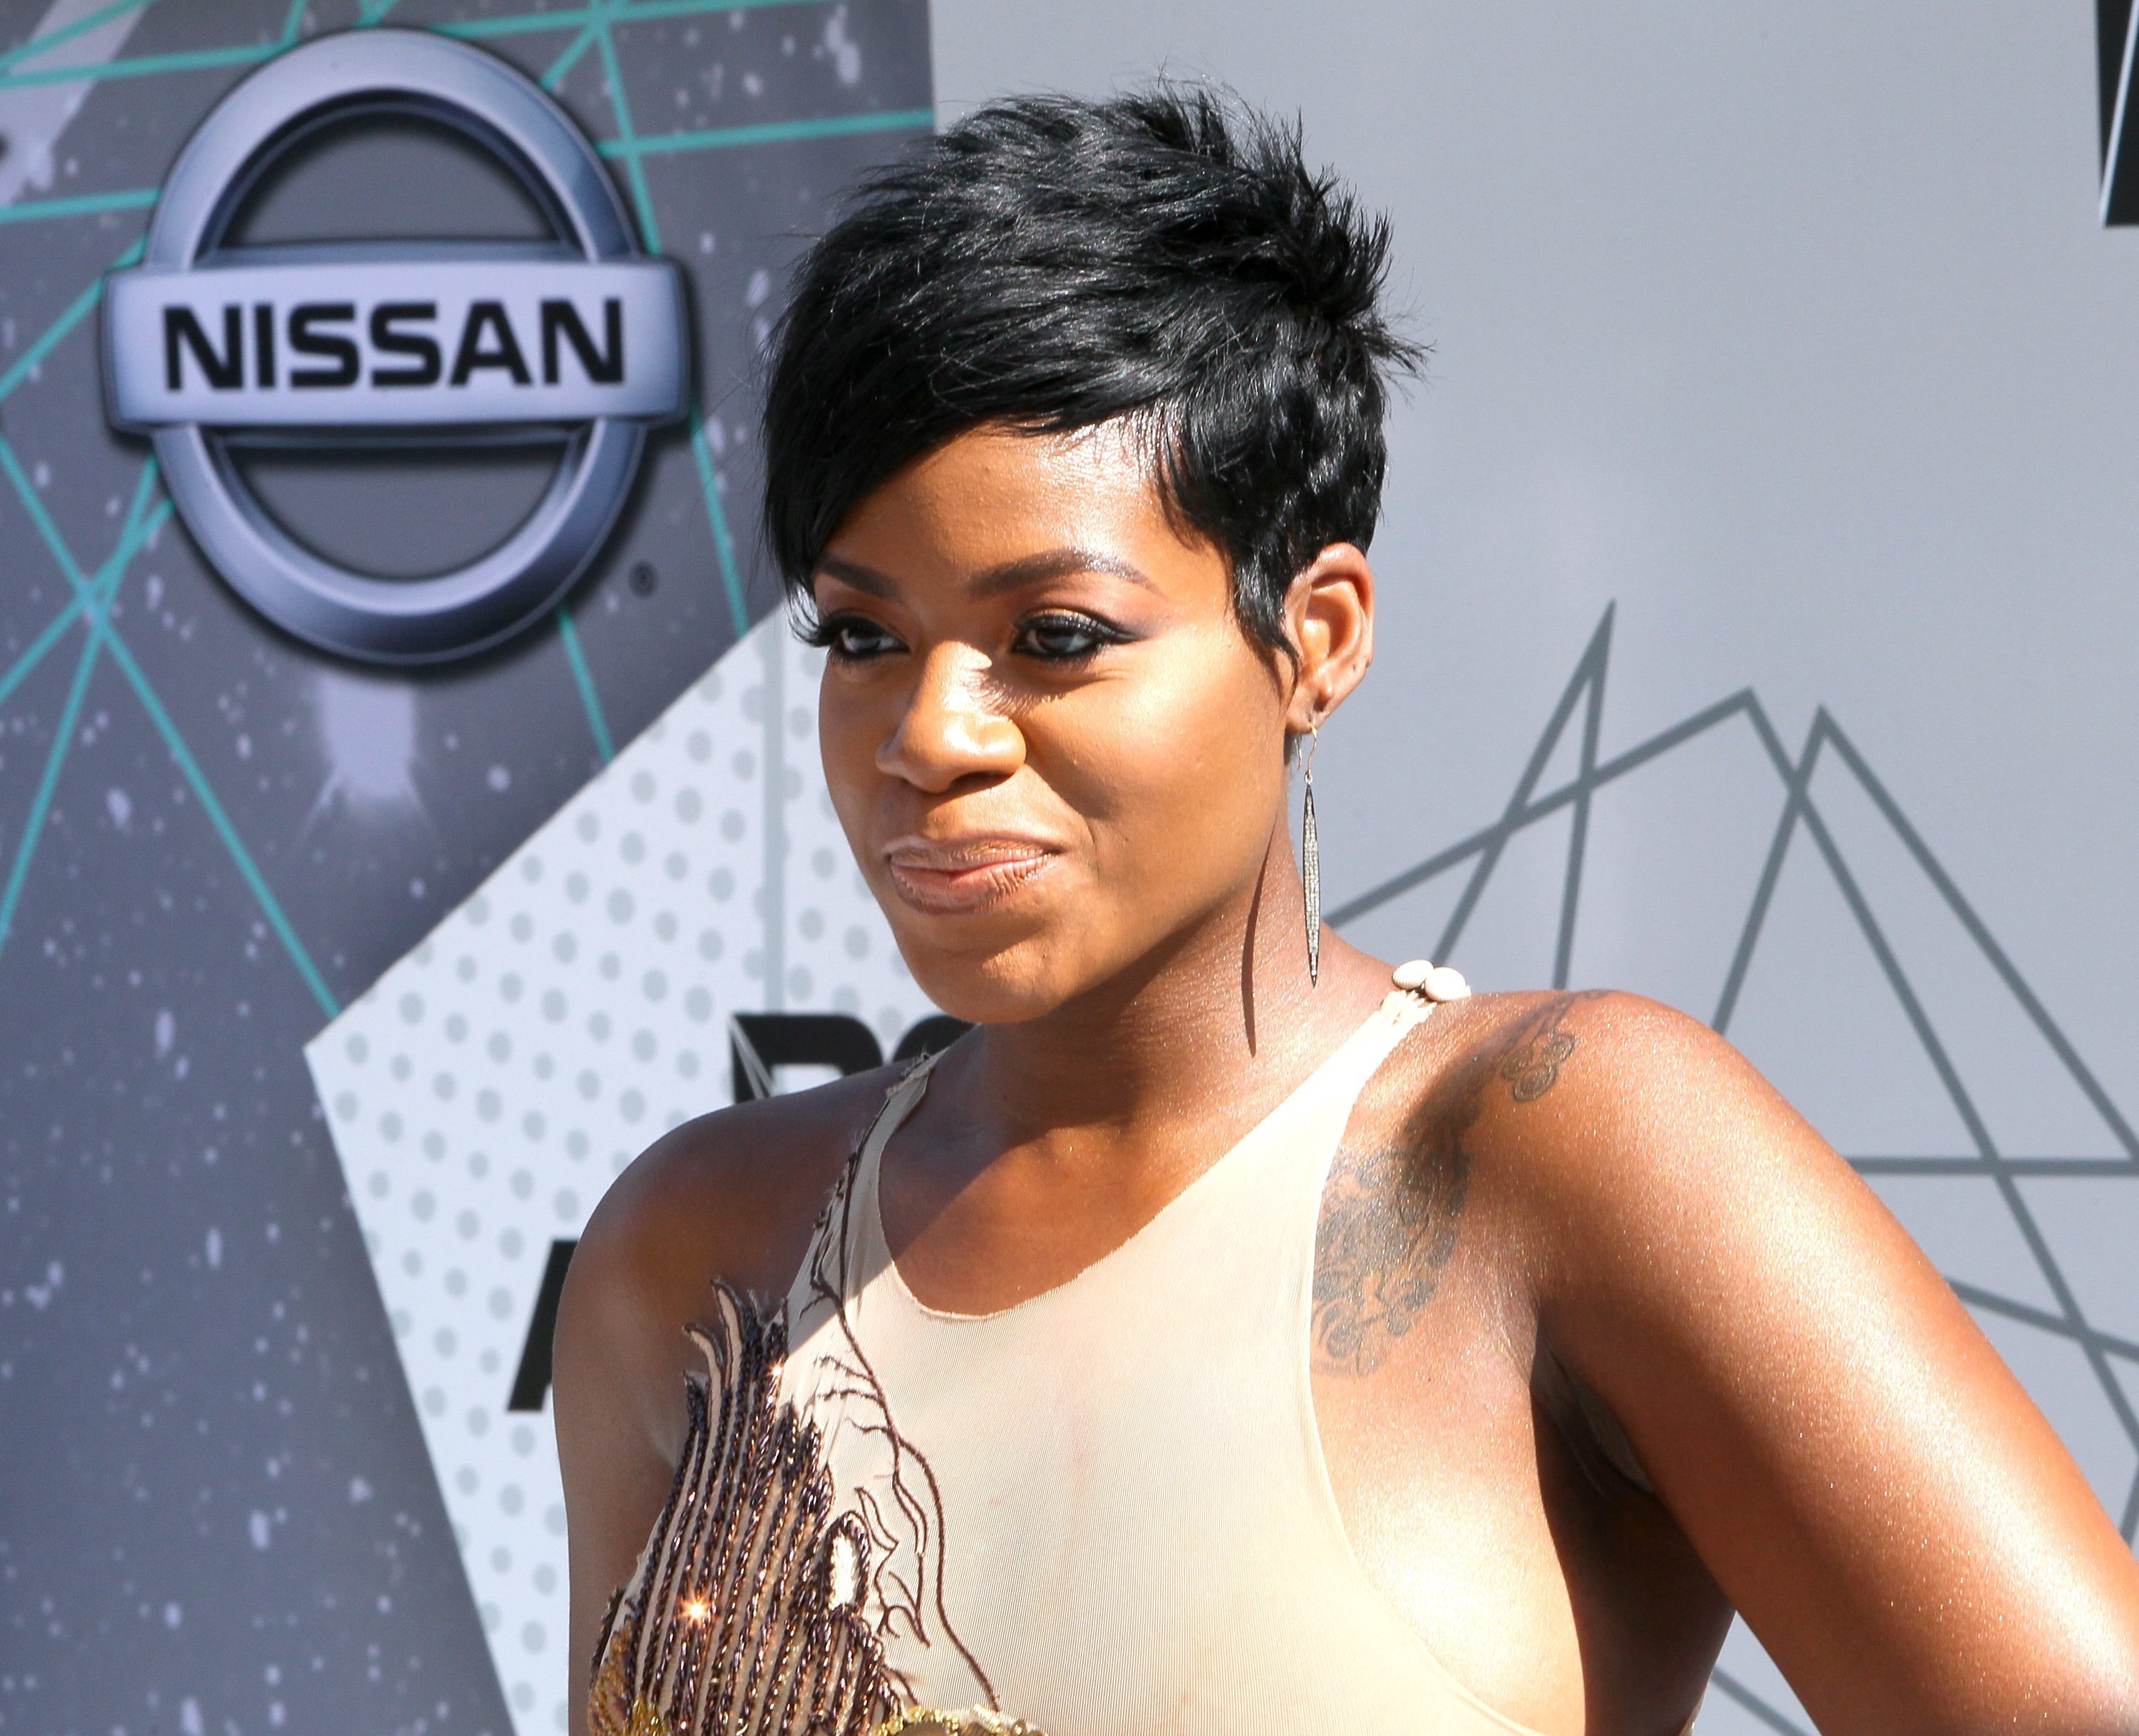 Fantasia Barrino at the 2016 BET Awards. | Photo: Getty Images